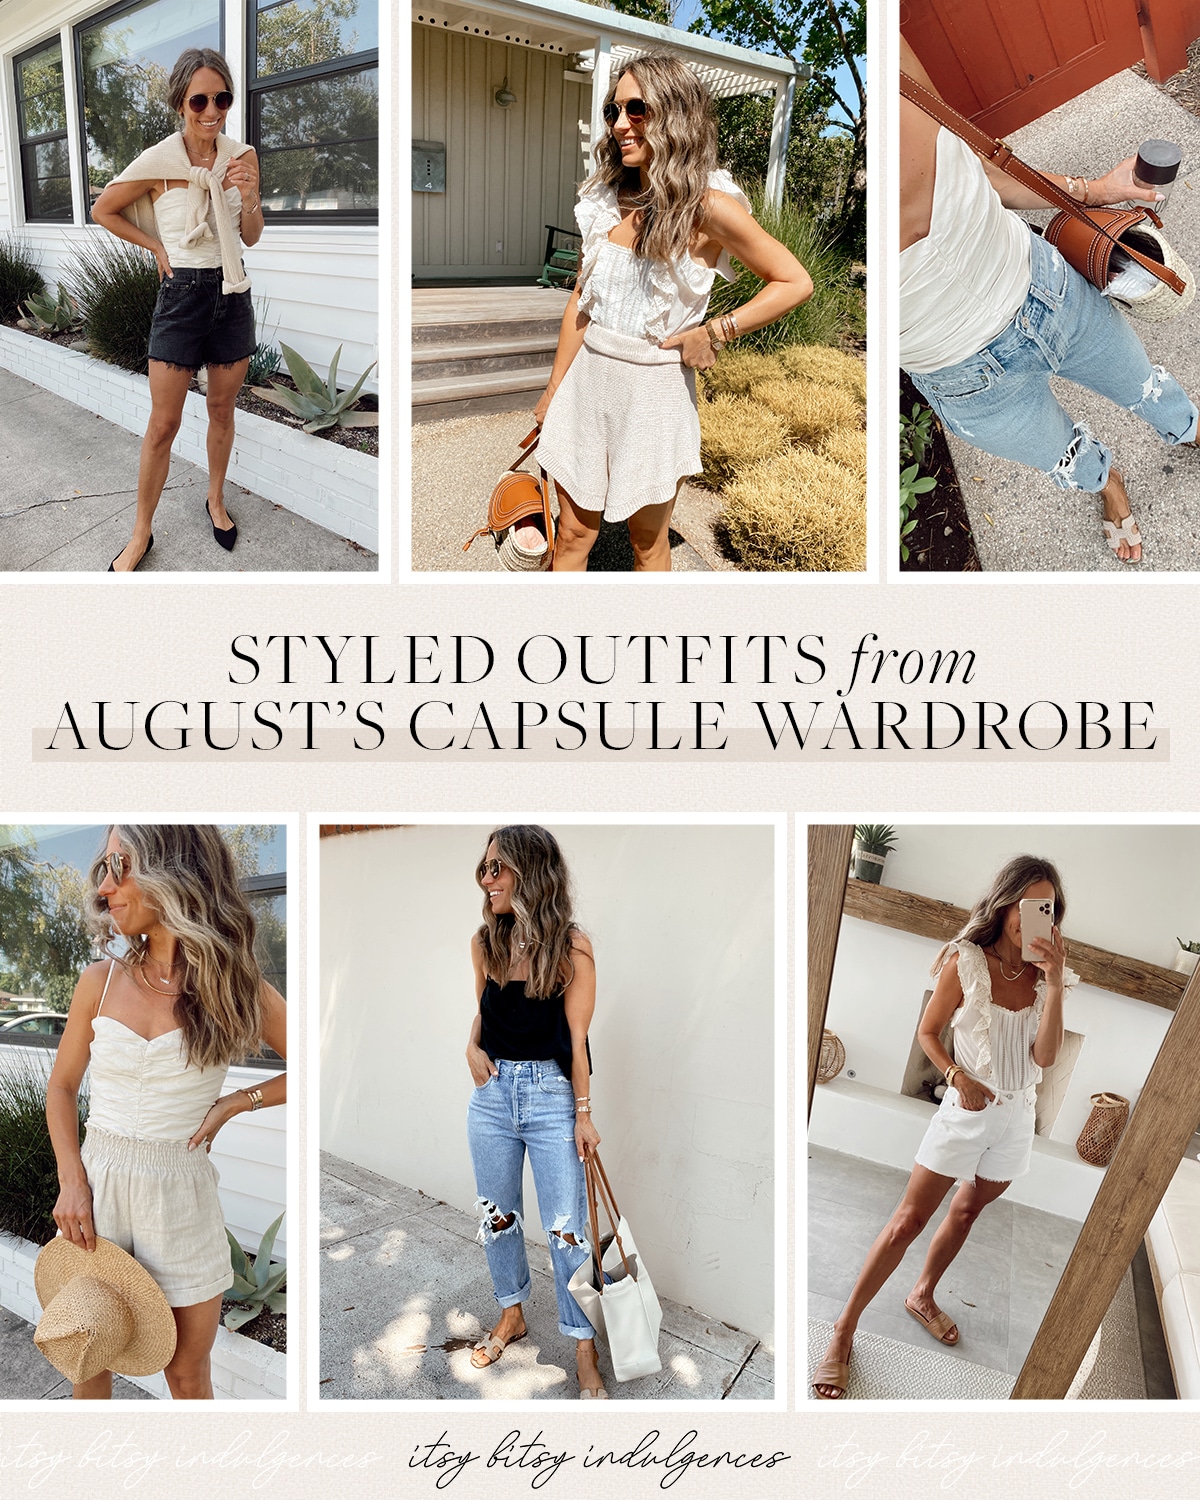 August's Capsule Wardrobe || 16 Styled Outfits - posts from Shannon ...